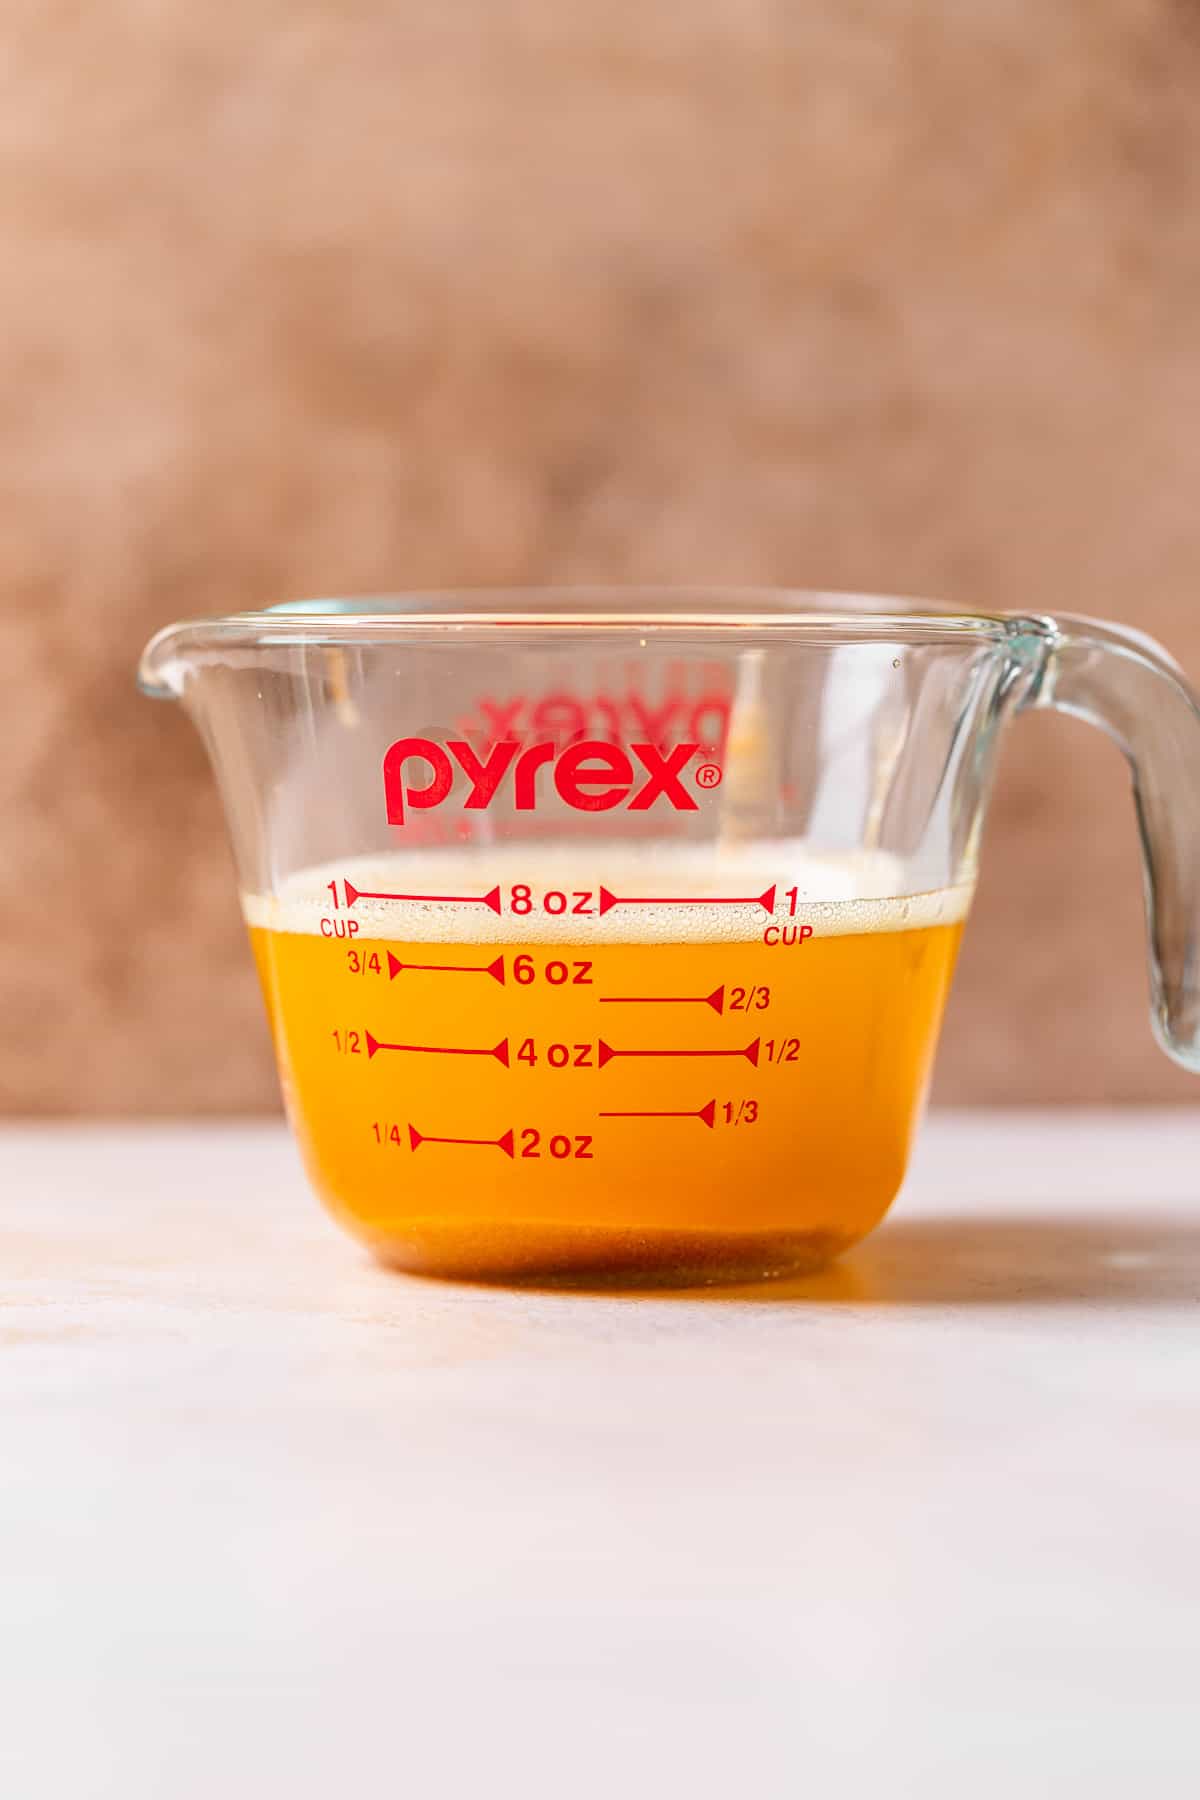 A glass pyrex measuring cup with browned european butter to show the moisture loss after browning.